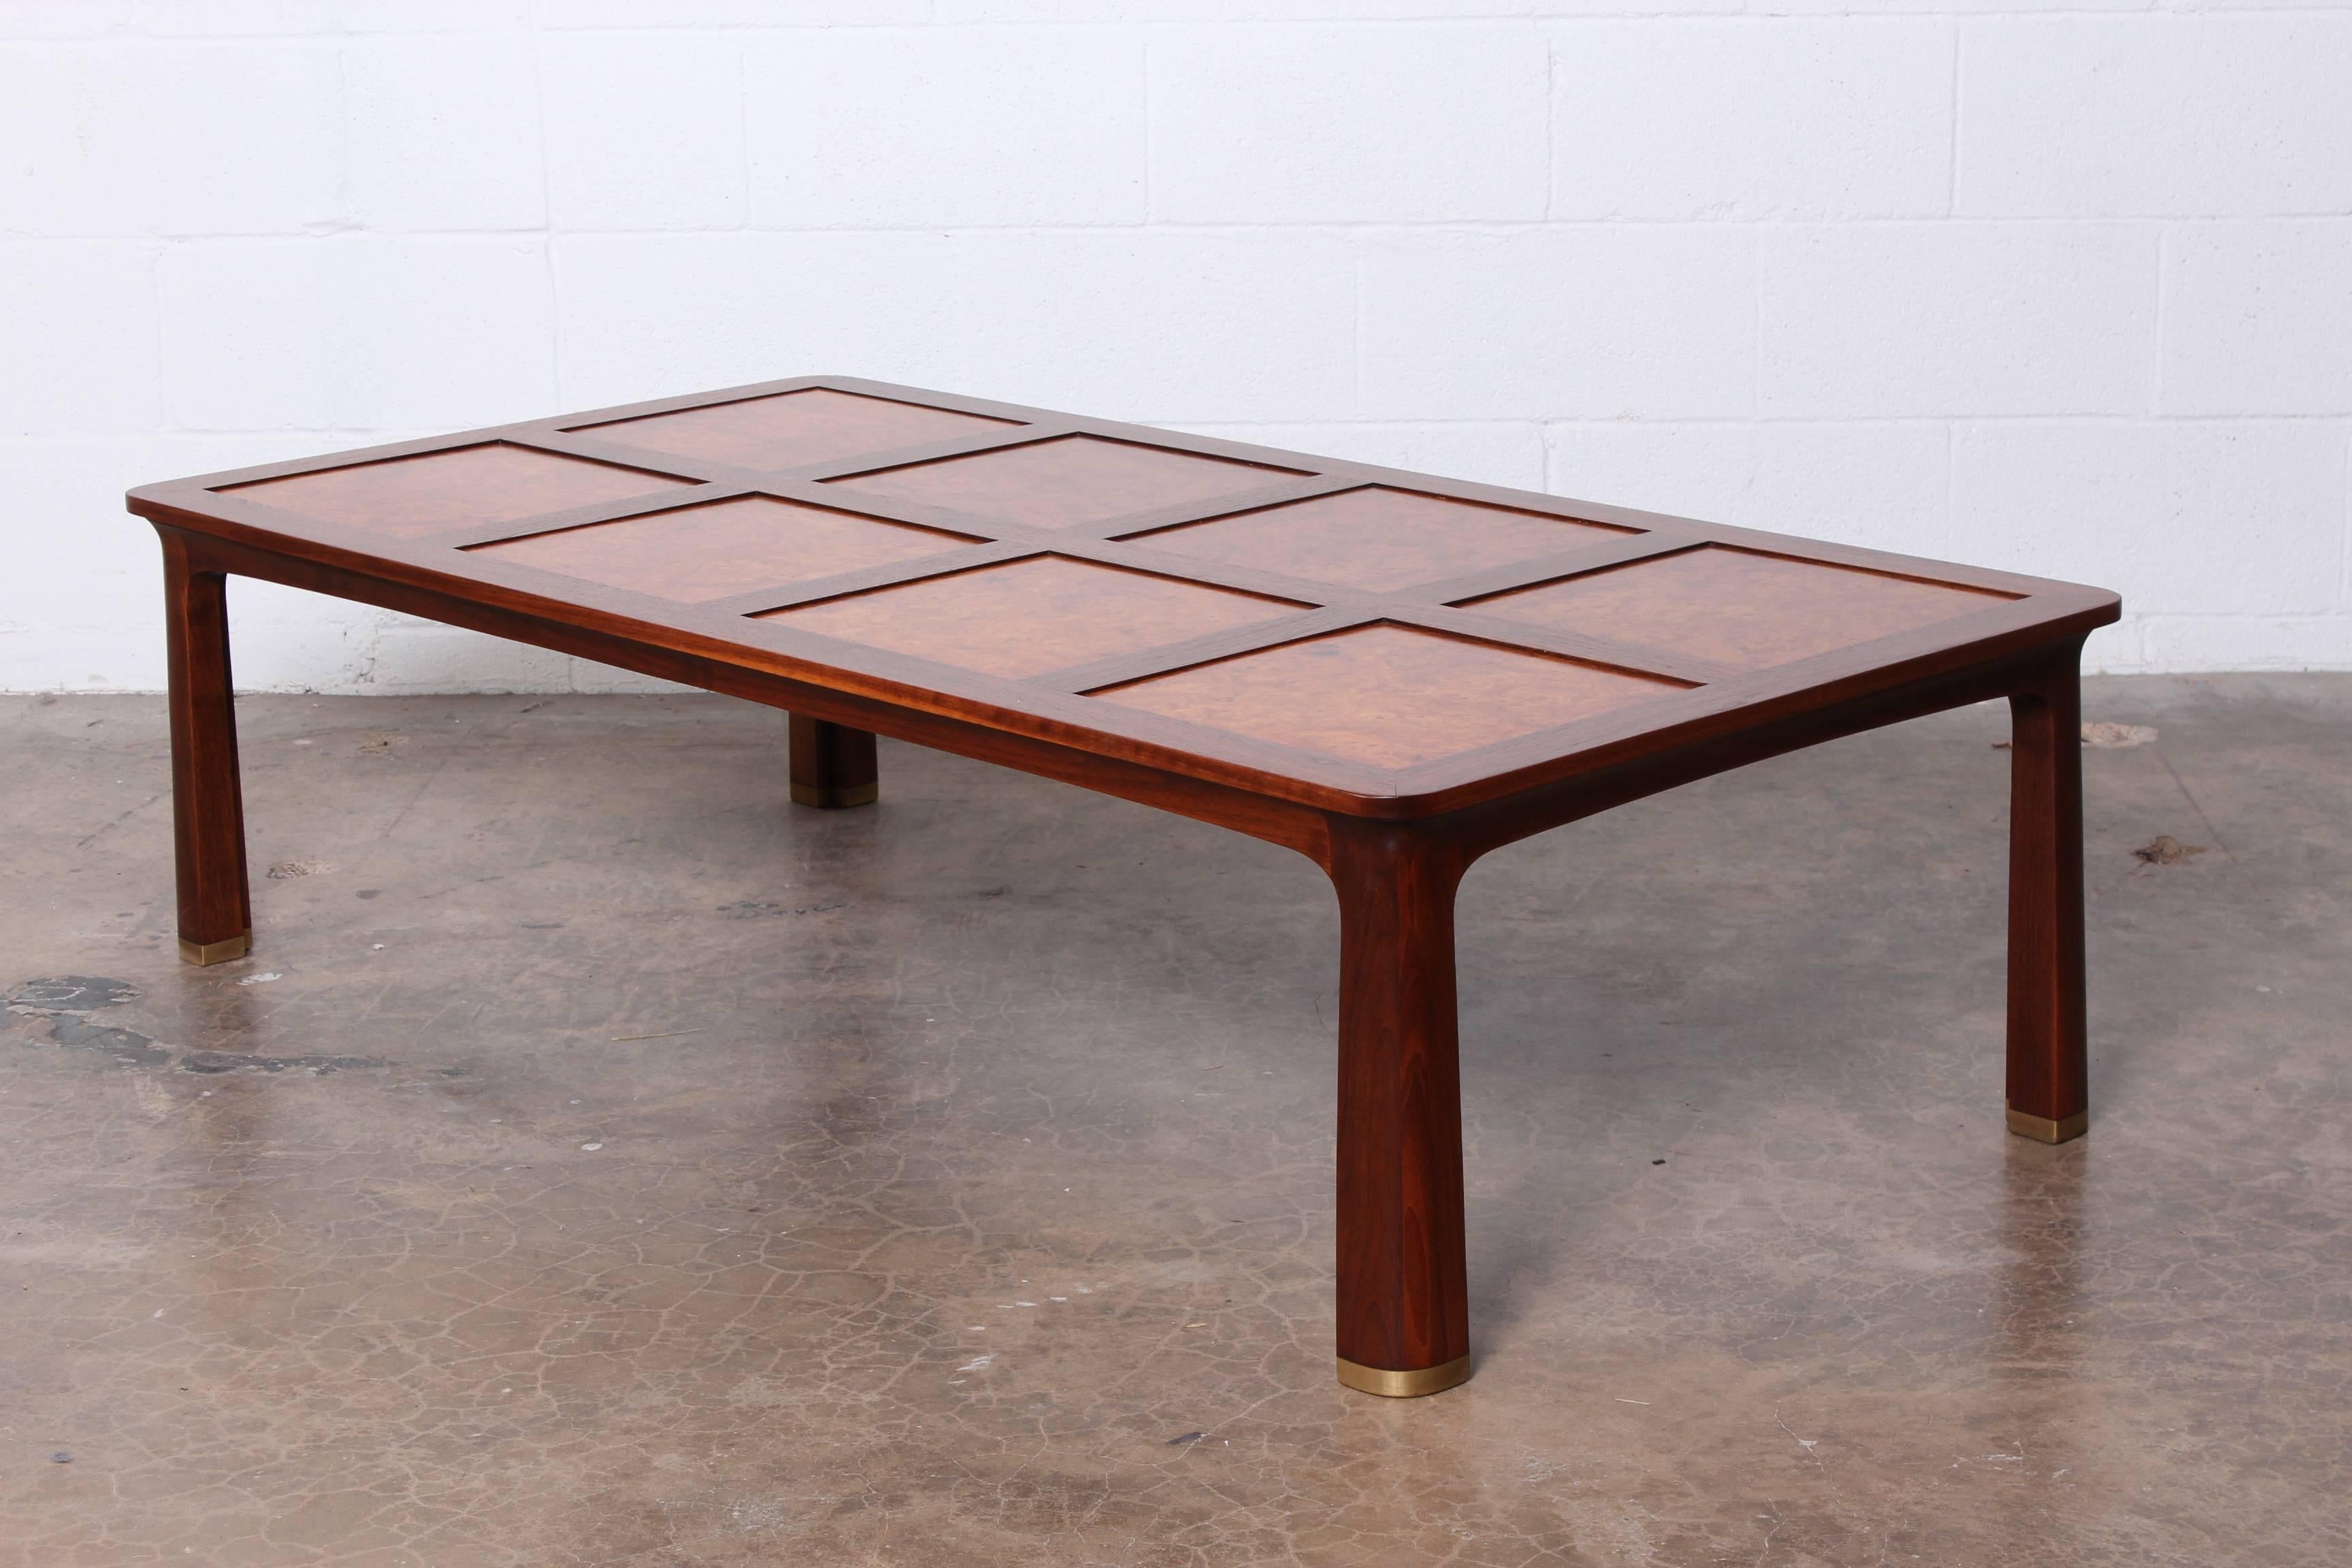 Mid-20th Century Large Coffee Table by Edward Wormley for Dunbar